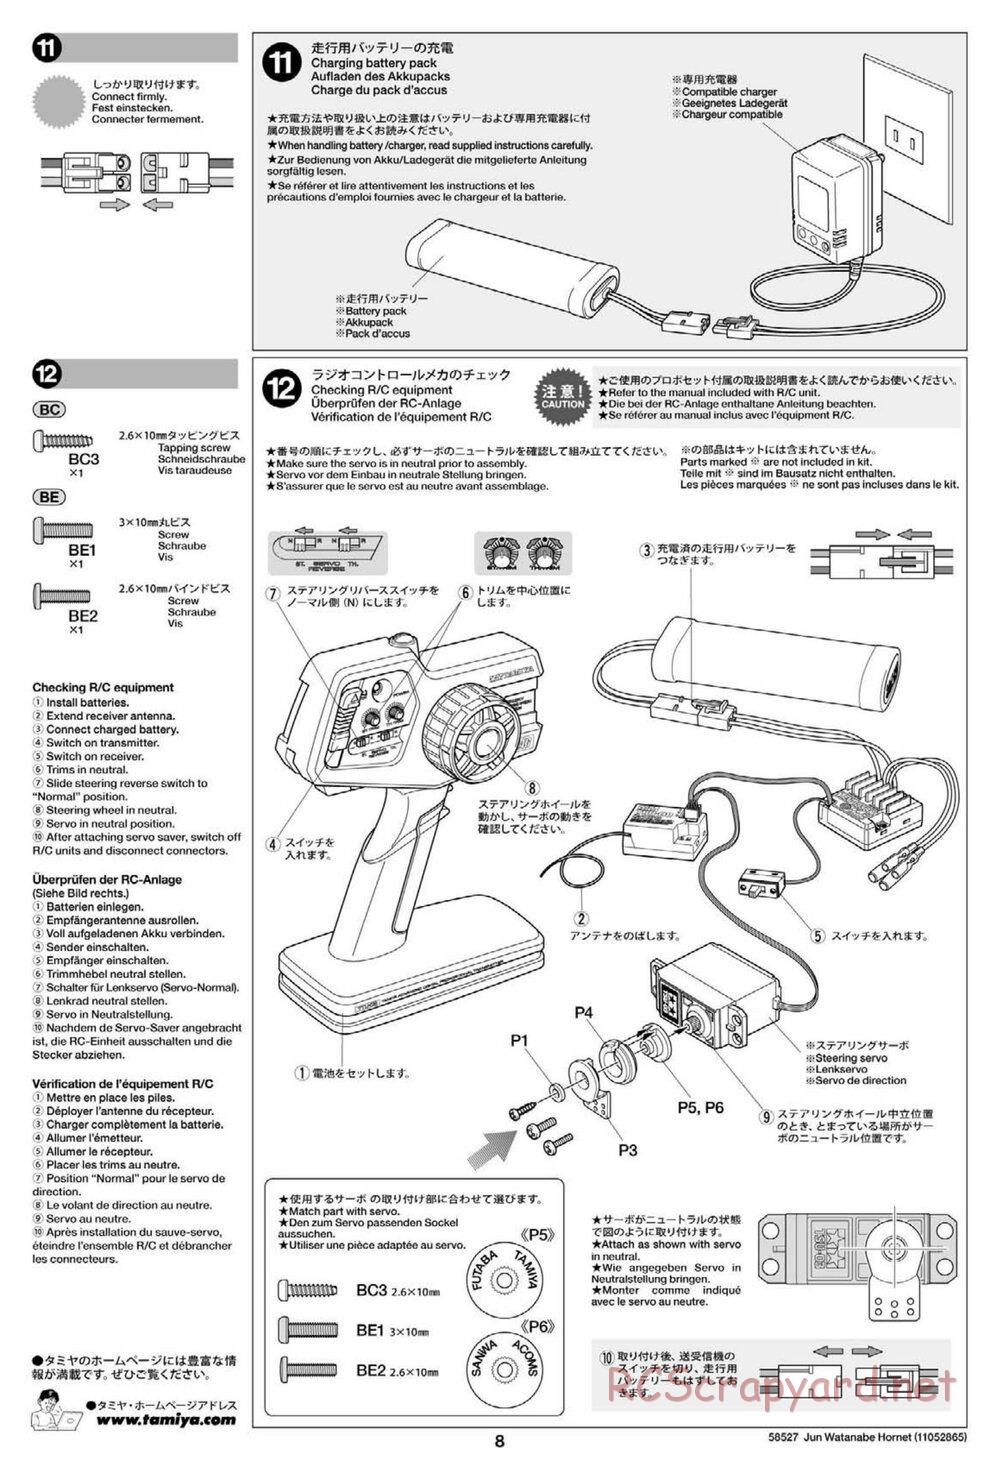 Tamiya - The Hornet by Jun Watanabe - GH Chassis - Manual - Page 8